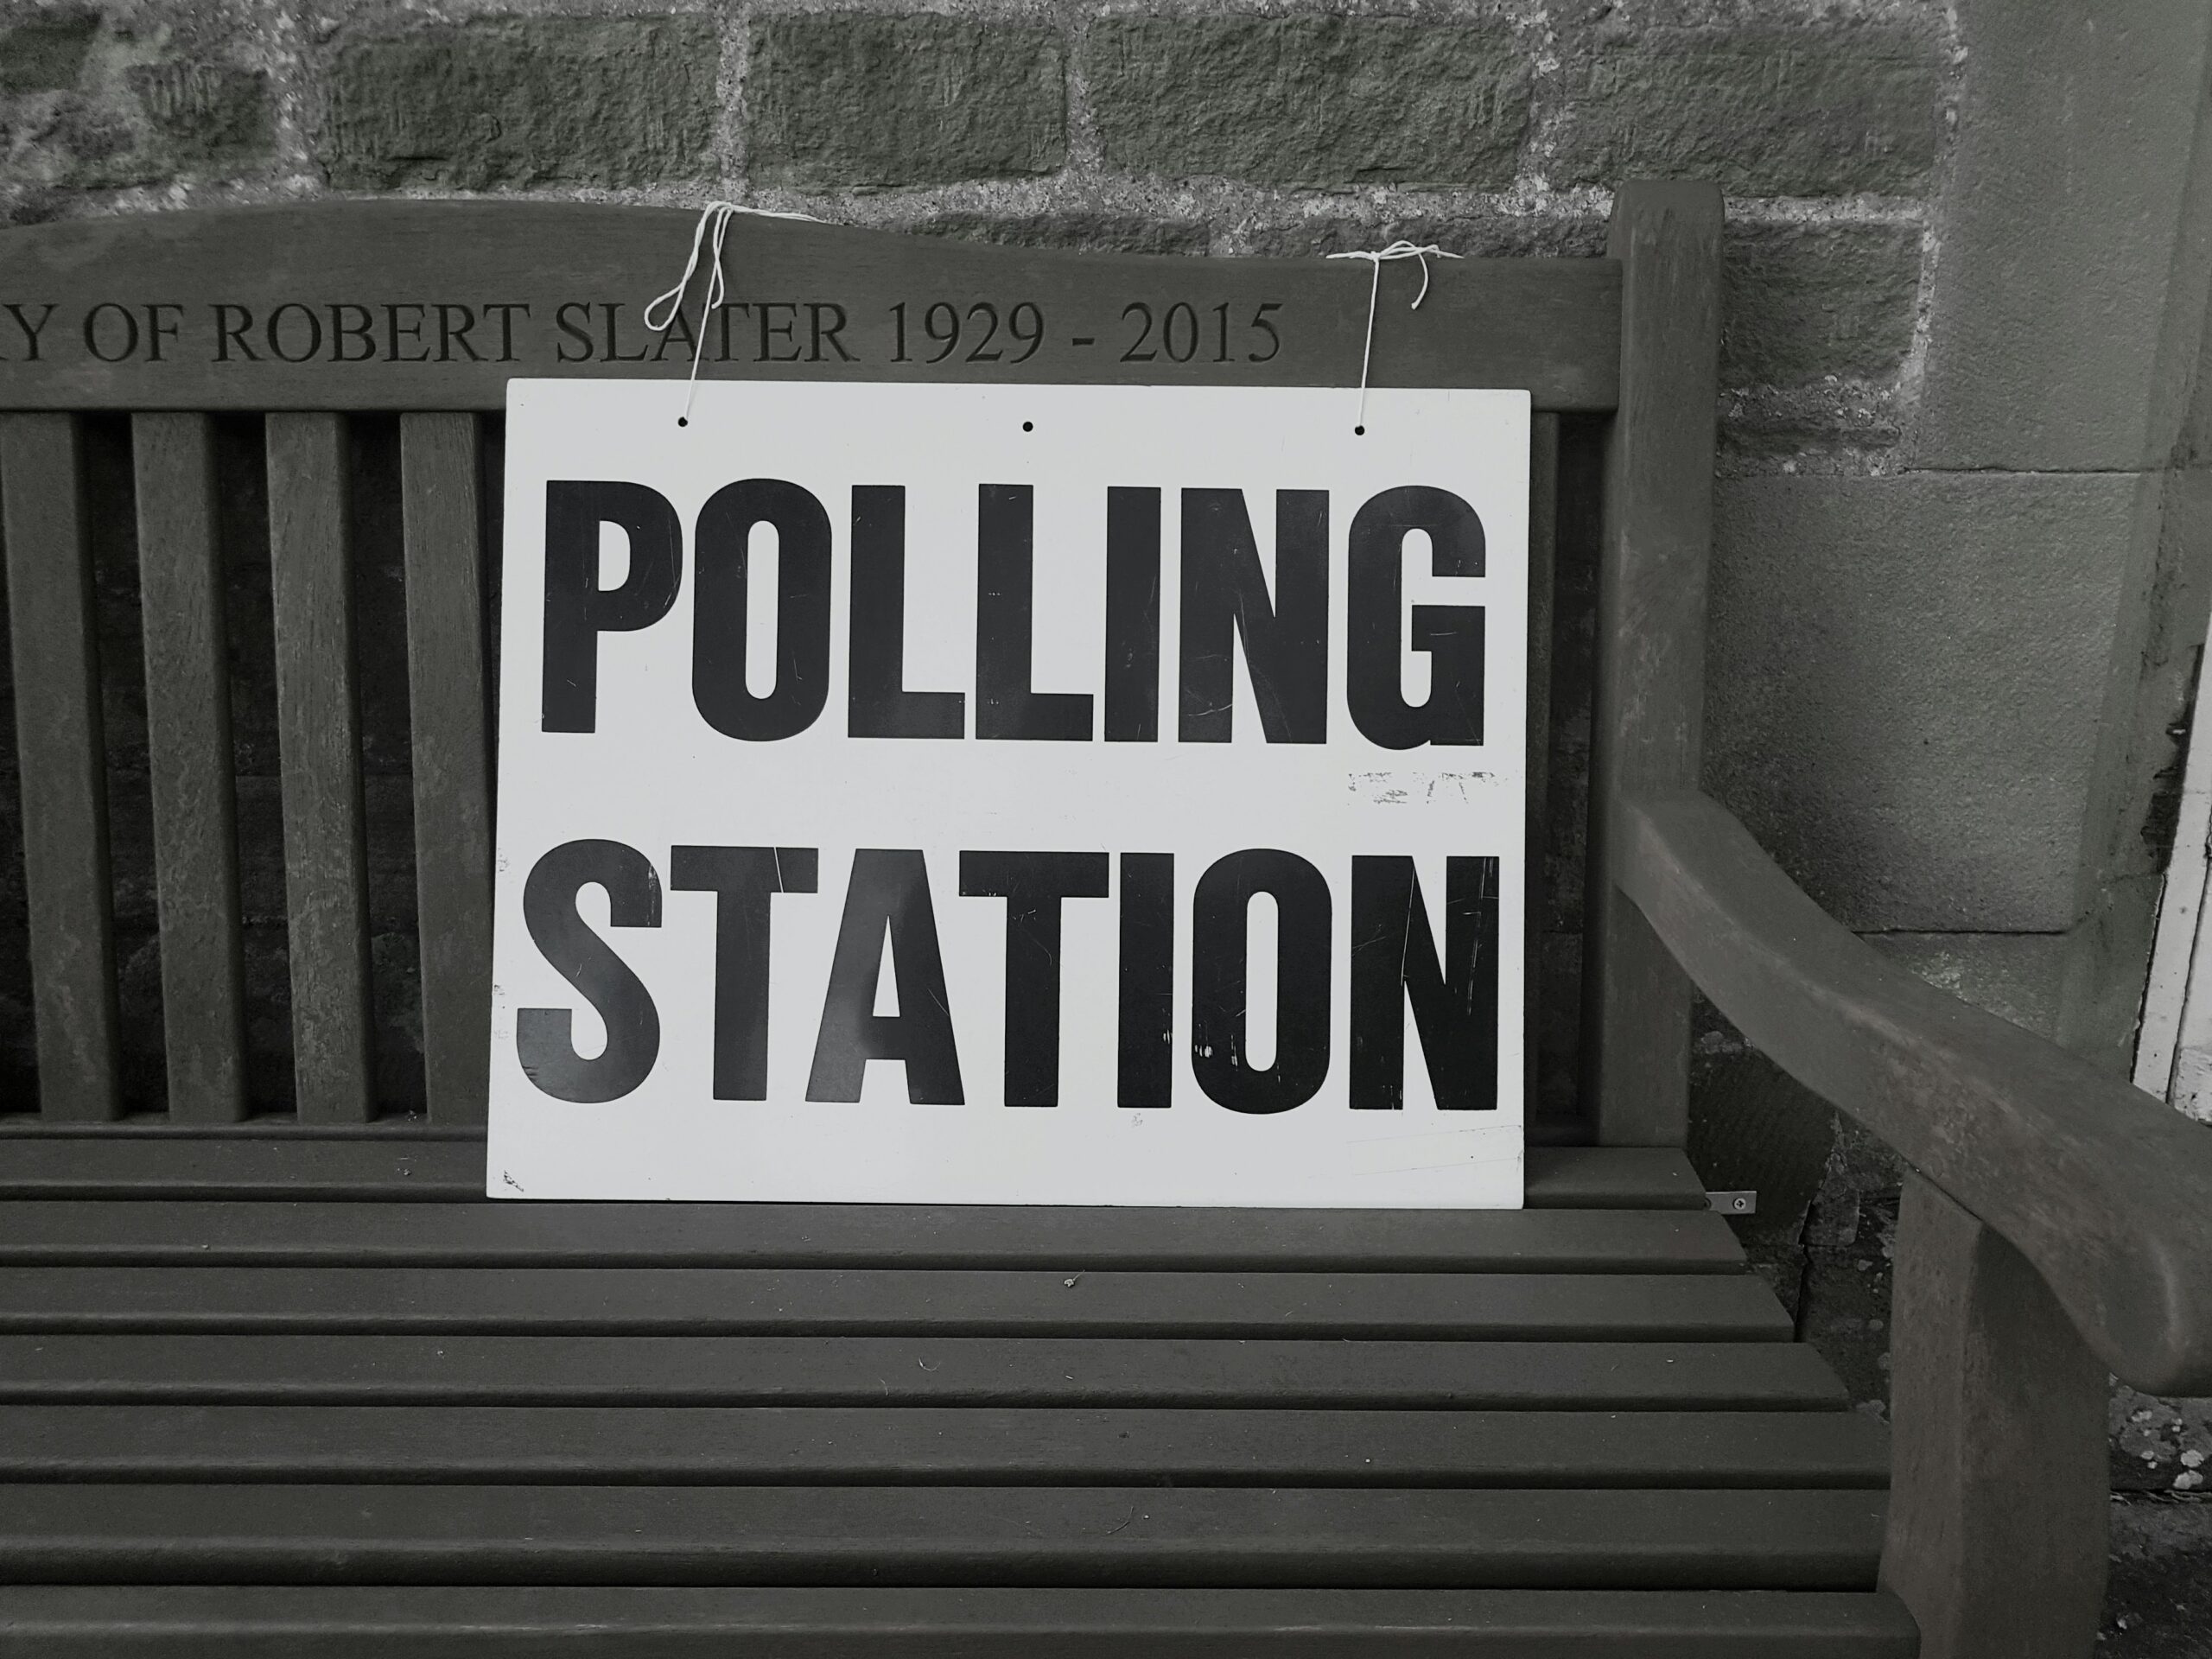 White sign on a bench that reads "POLLING STATION".